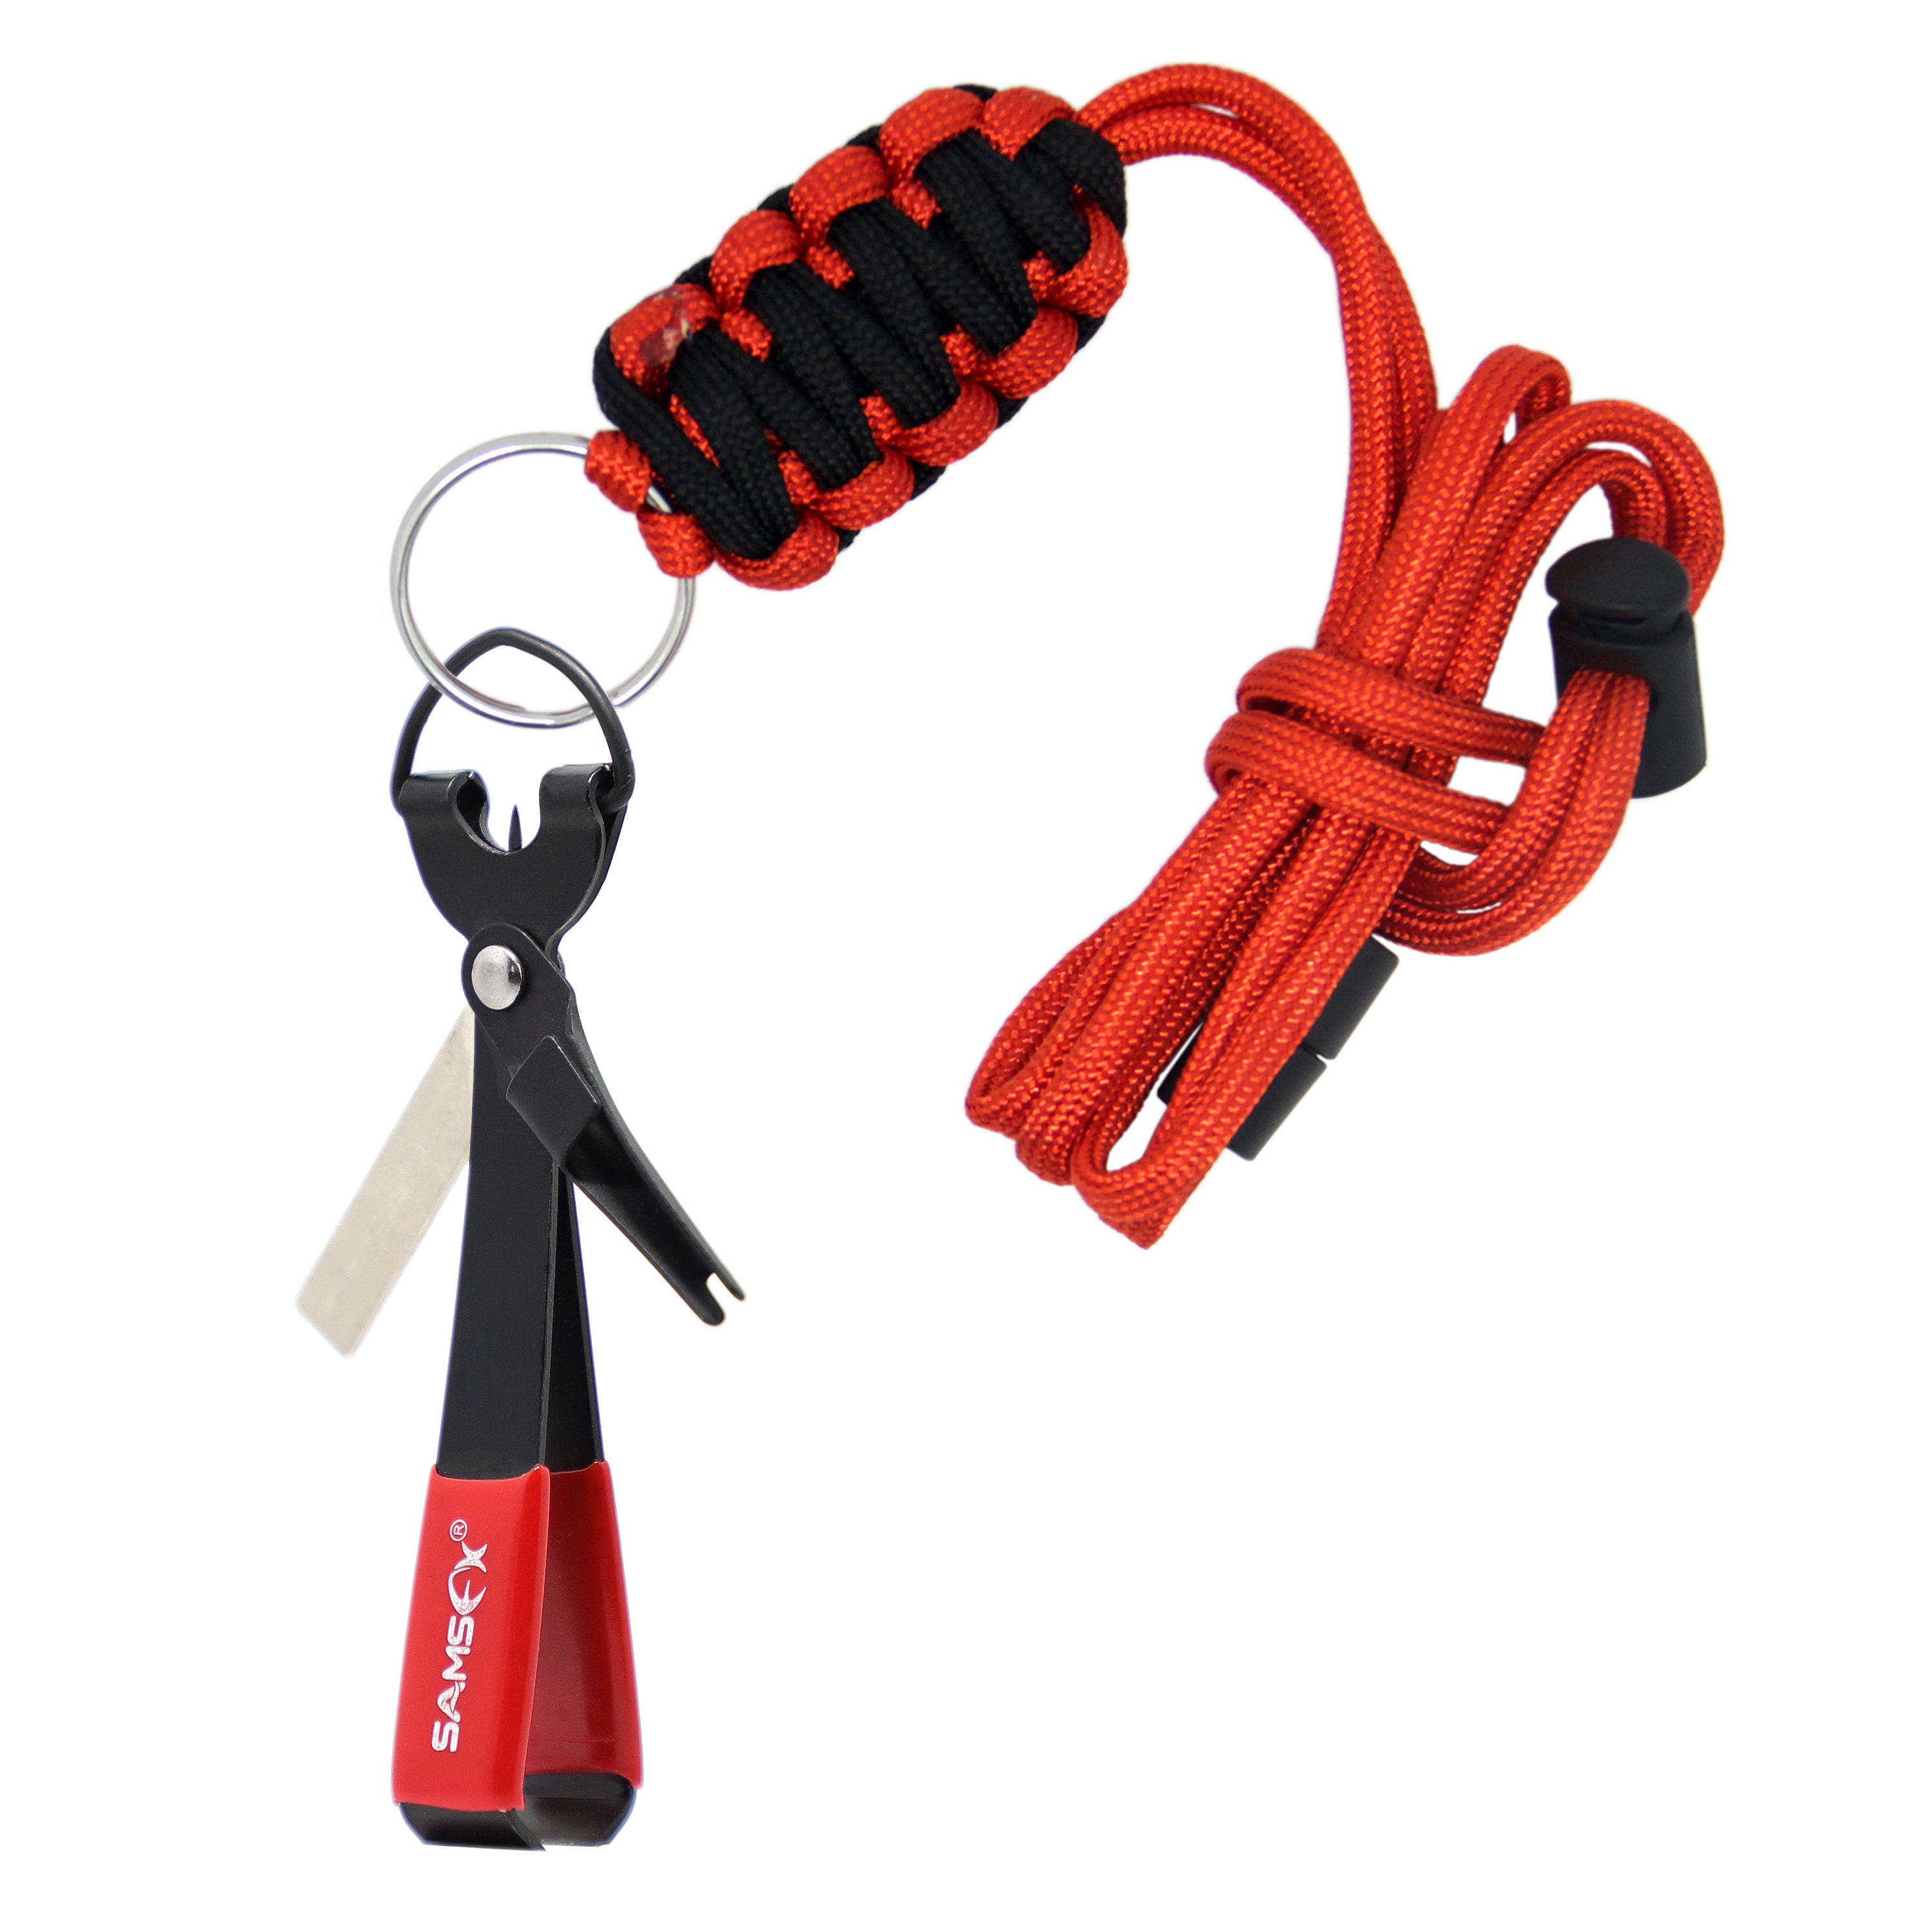  SAMSFX Fishing Knot Tying Tool and Hook Remover with Zinger  Retractor Combo : Sports & Outdoors